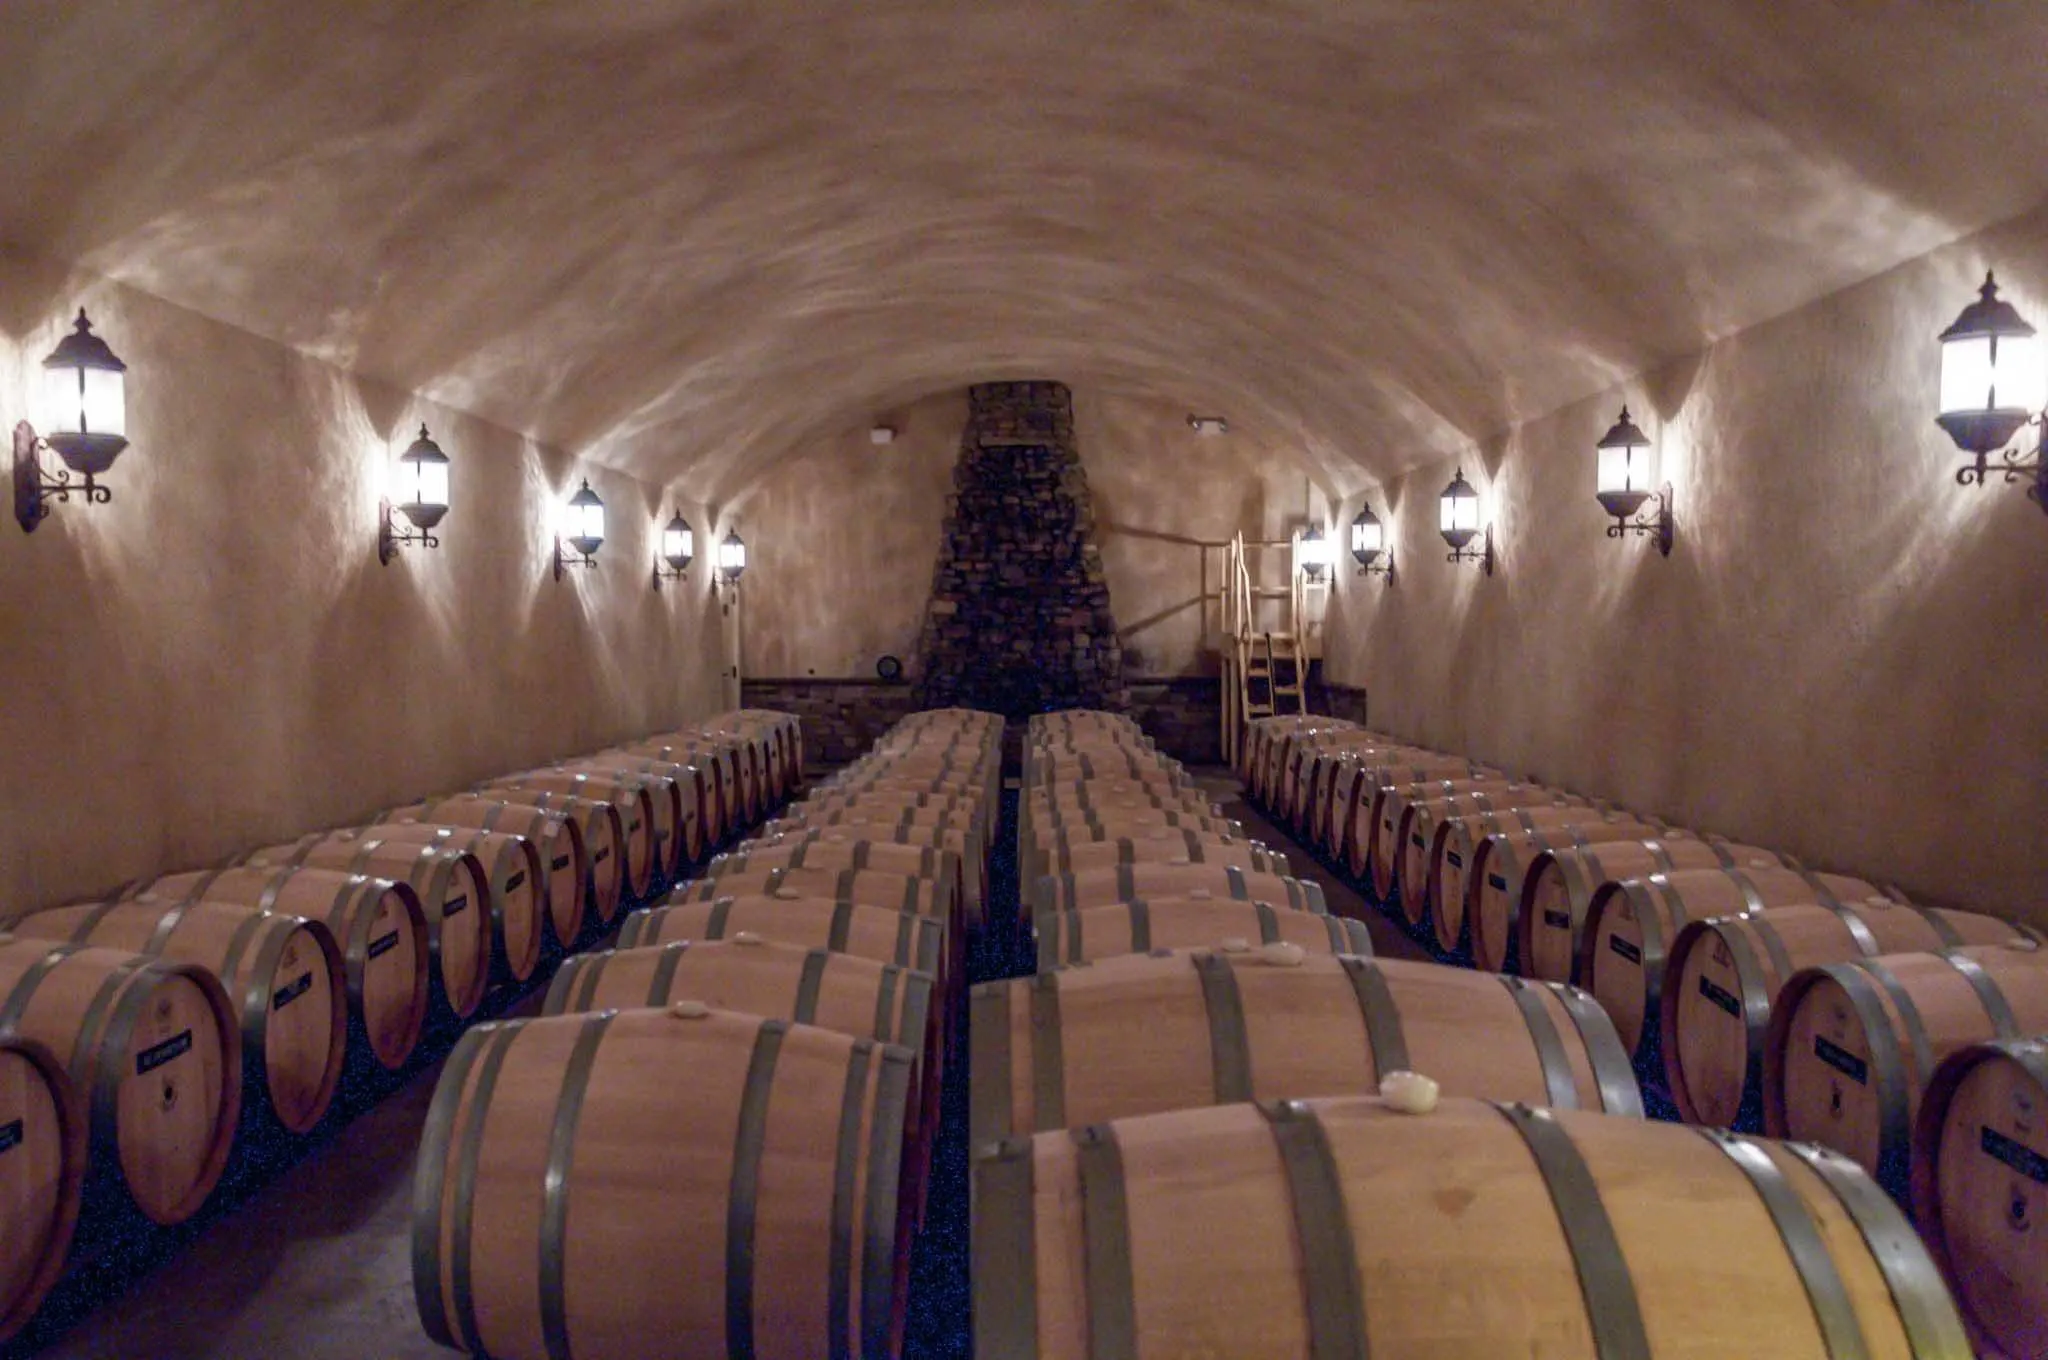 Room filled with wine barrels